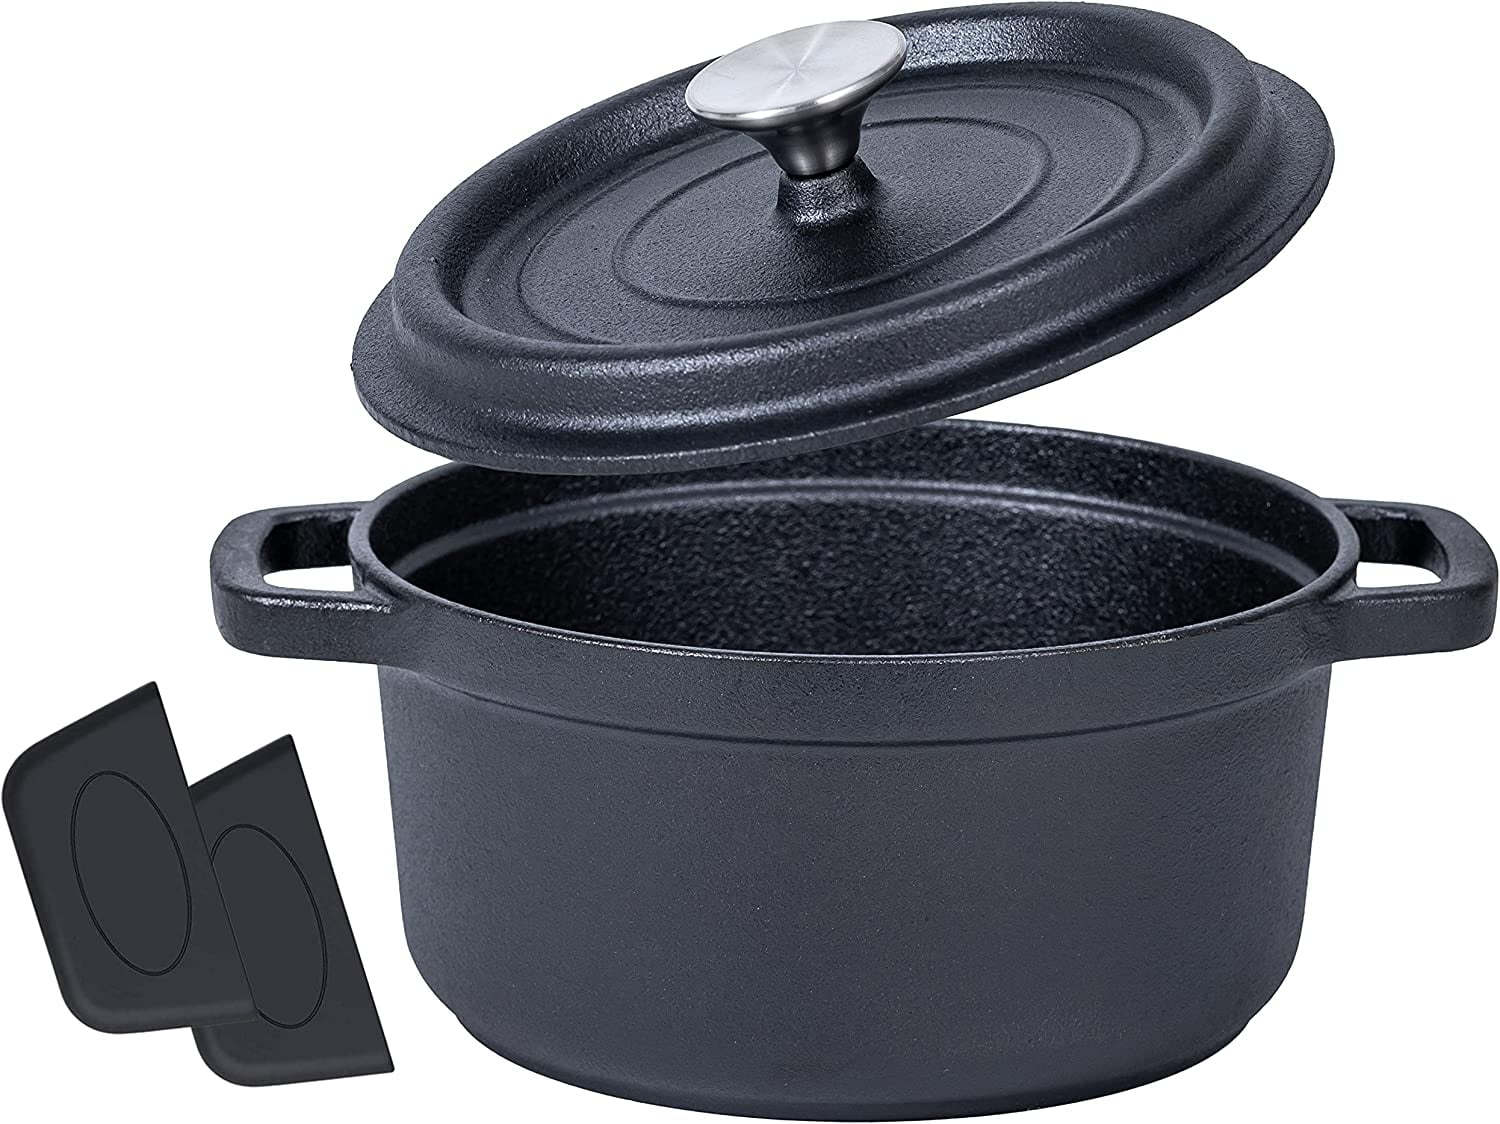 Lodge Camp Dutch Oven Lid Lifter. Black 9 MM Bar Stock for Lifting and  Carrying Dutch Ovens. (Black Finish): Cookware Accessories: Home & Kitchen  